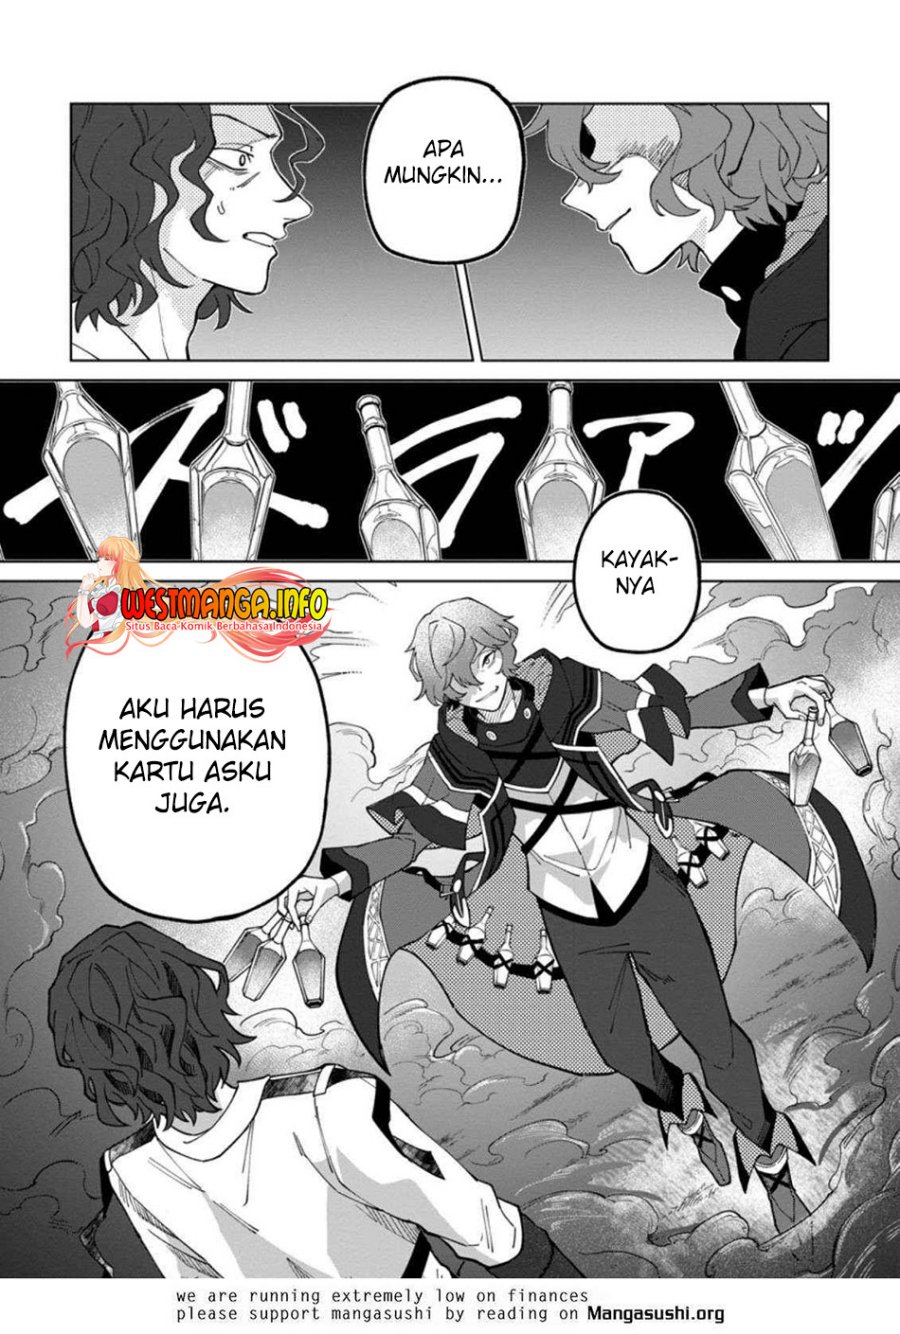 KomiknThe White Mage Who Was Banished From the Hero’s Party Is Picked up by an S Rank Adventurer ~ This White Mage Is Too Out of the Ordinary! Chapter 17.3